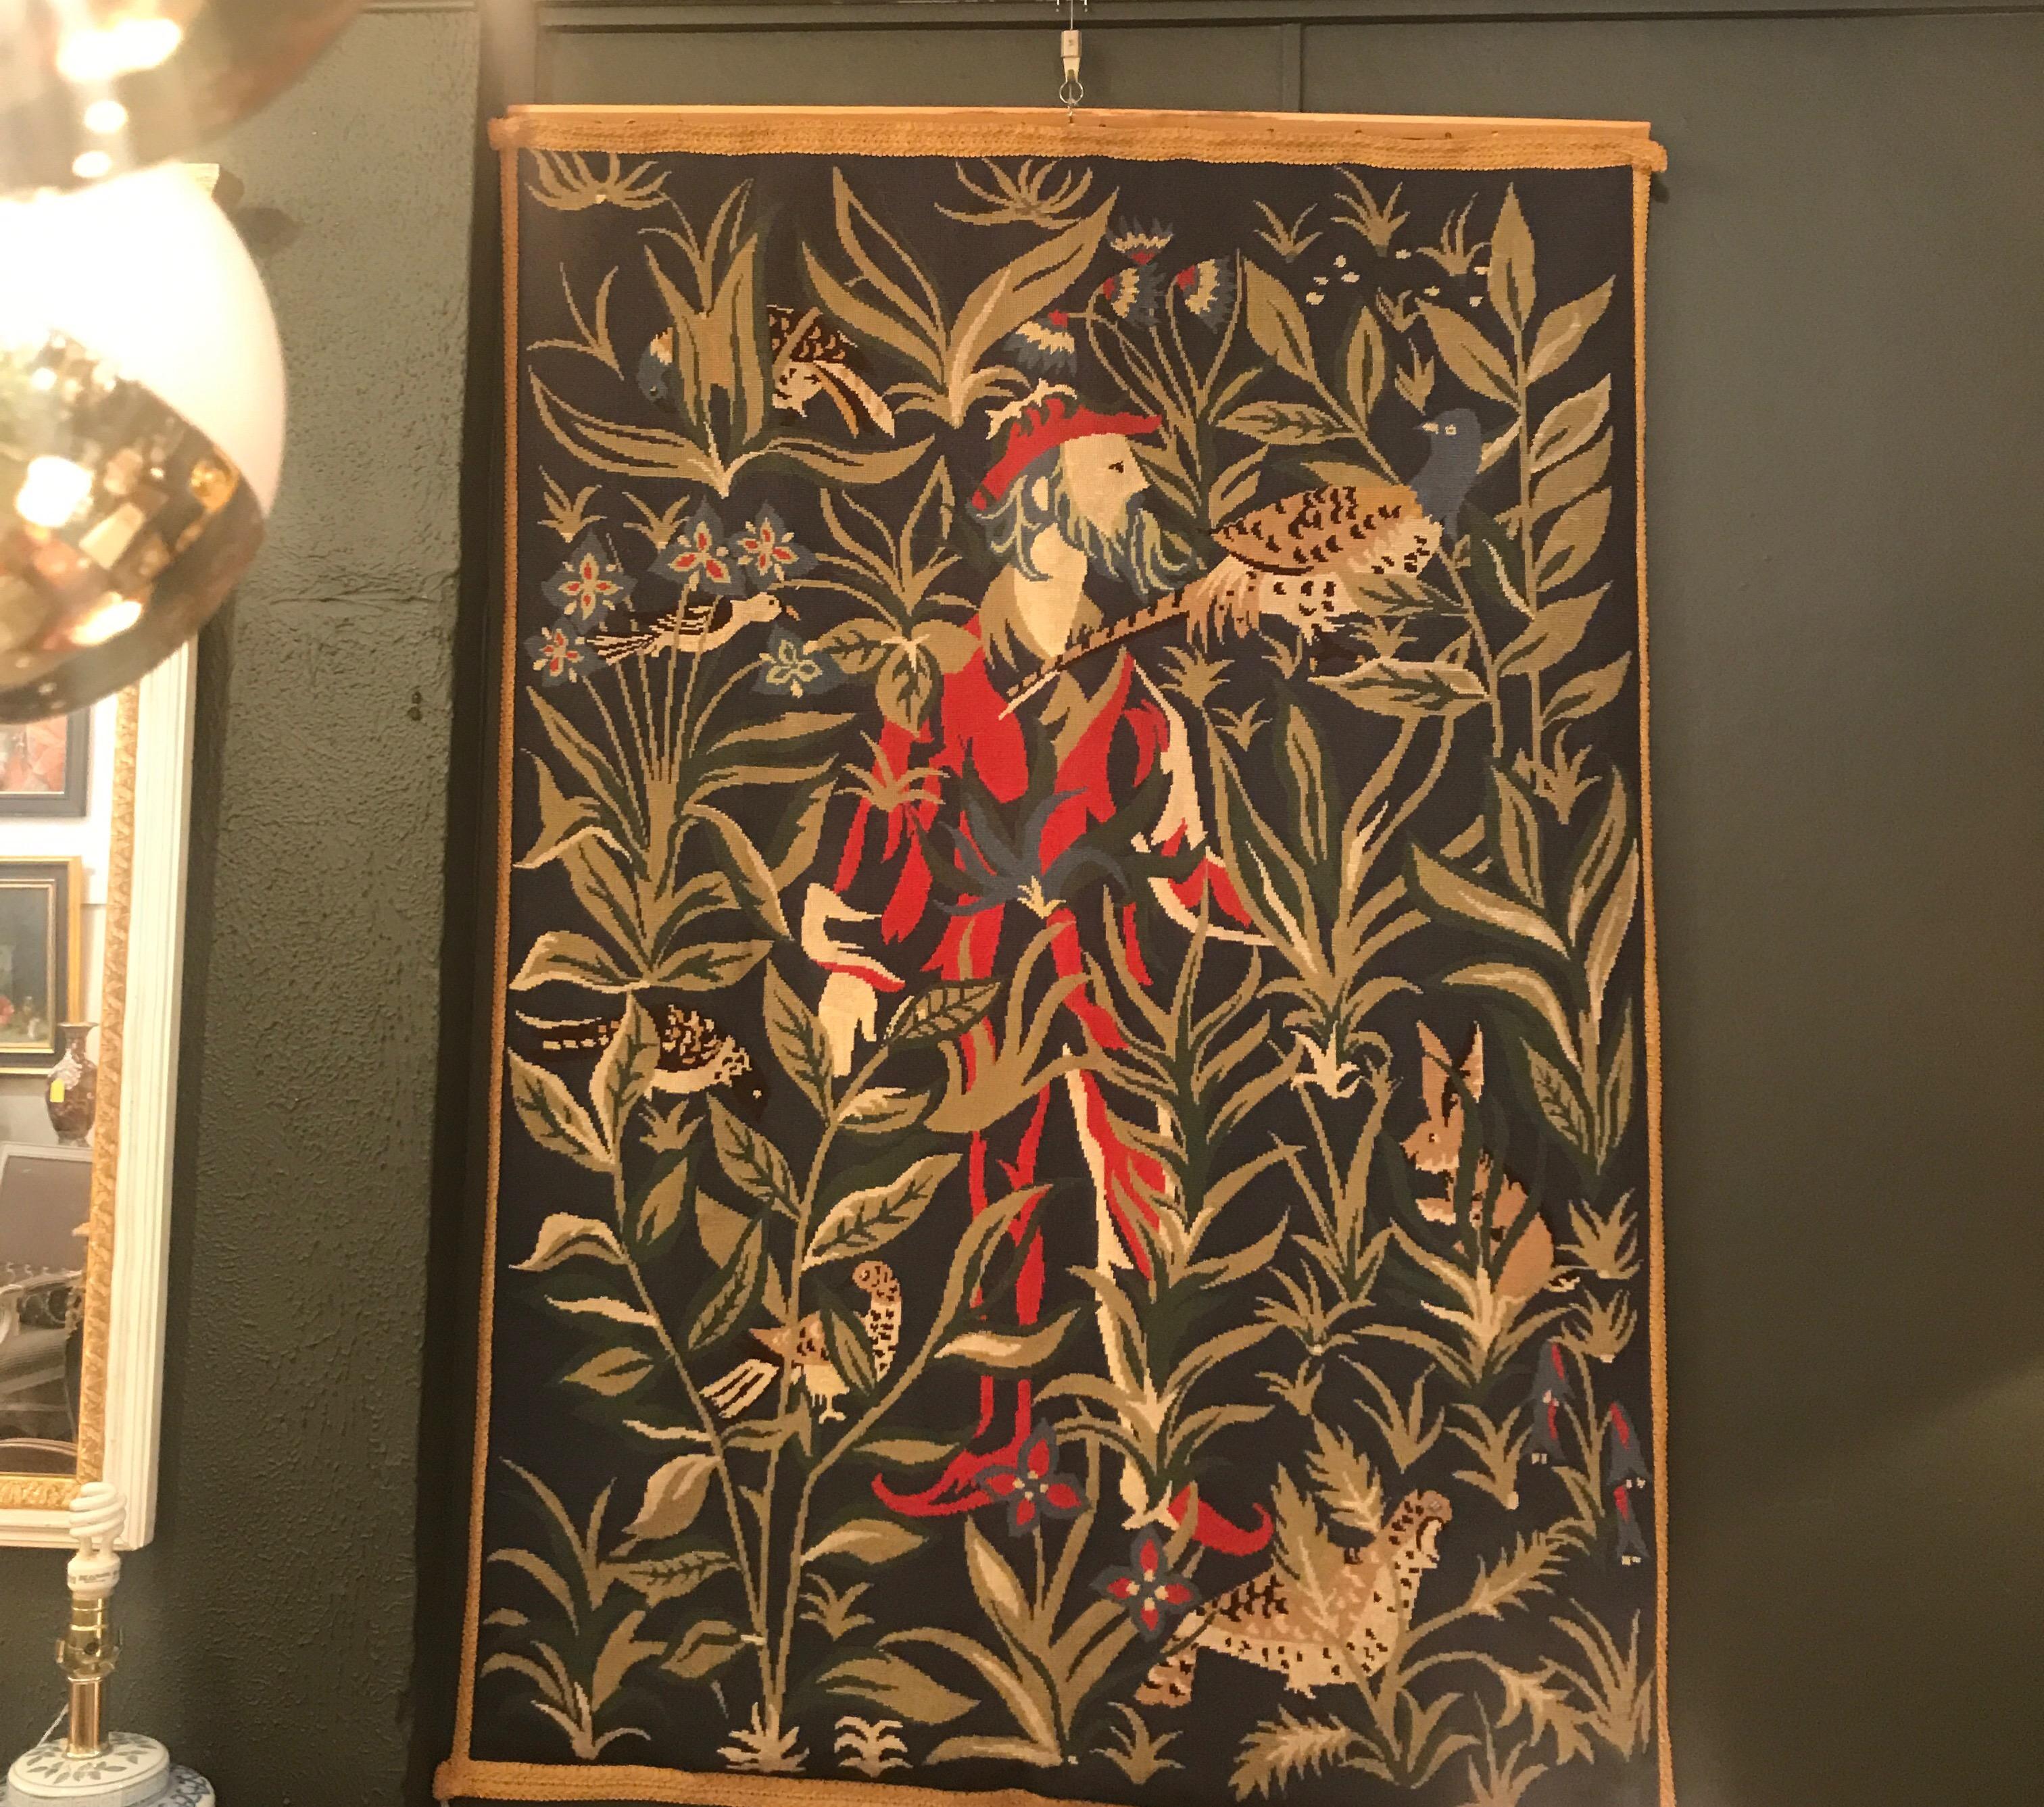 A hand embroidered wool tapestry with lining. The tapestry depicting a medieval figure surrounded by foliage with birds and small woodland creatures. The silk lining neatly stitched entirely by hand. All wool yarn.